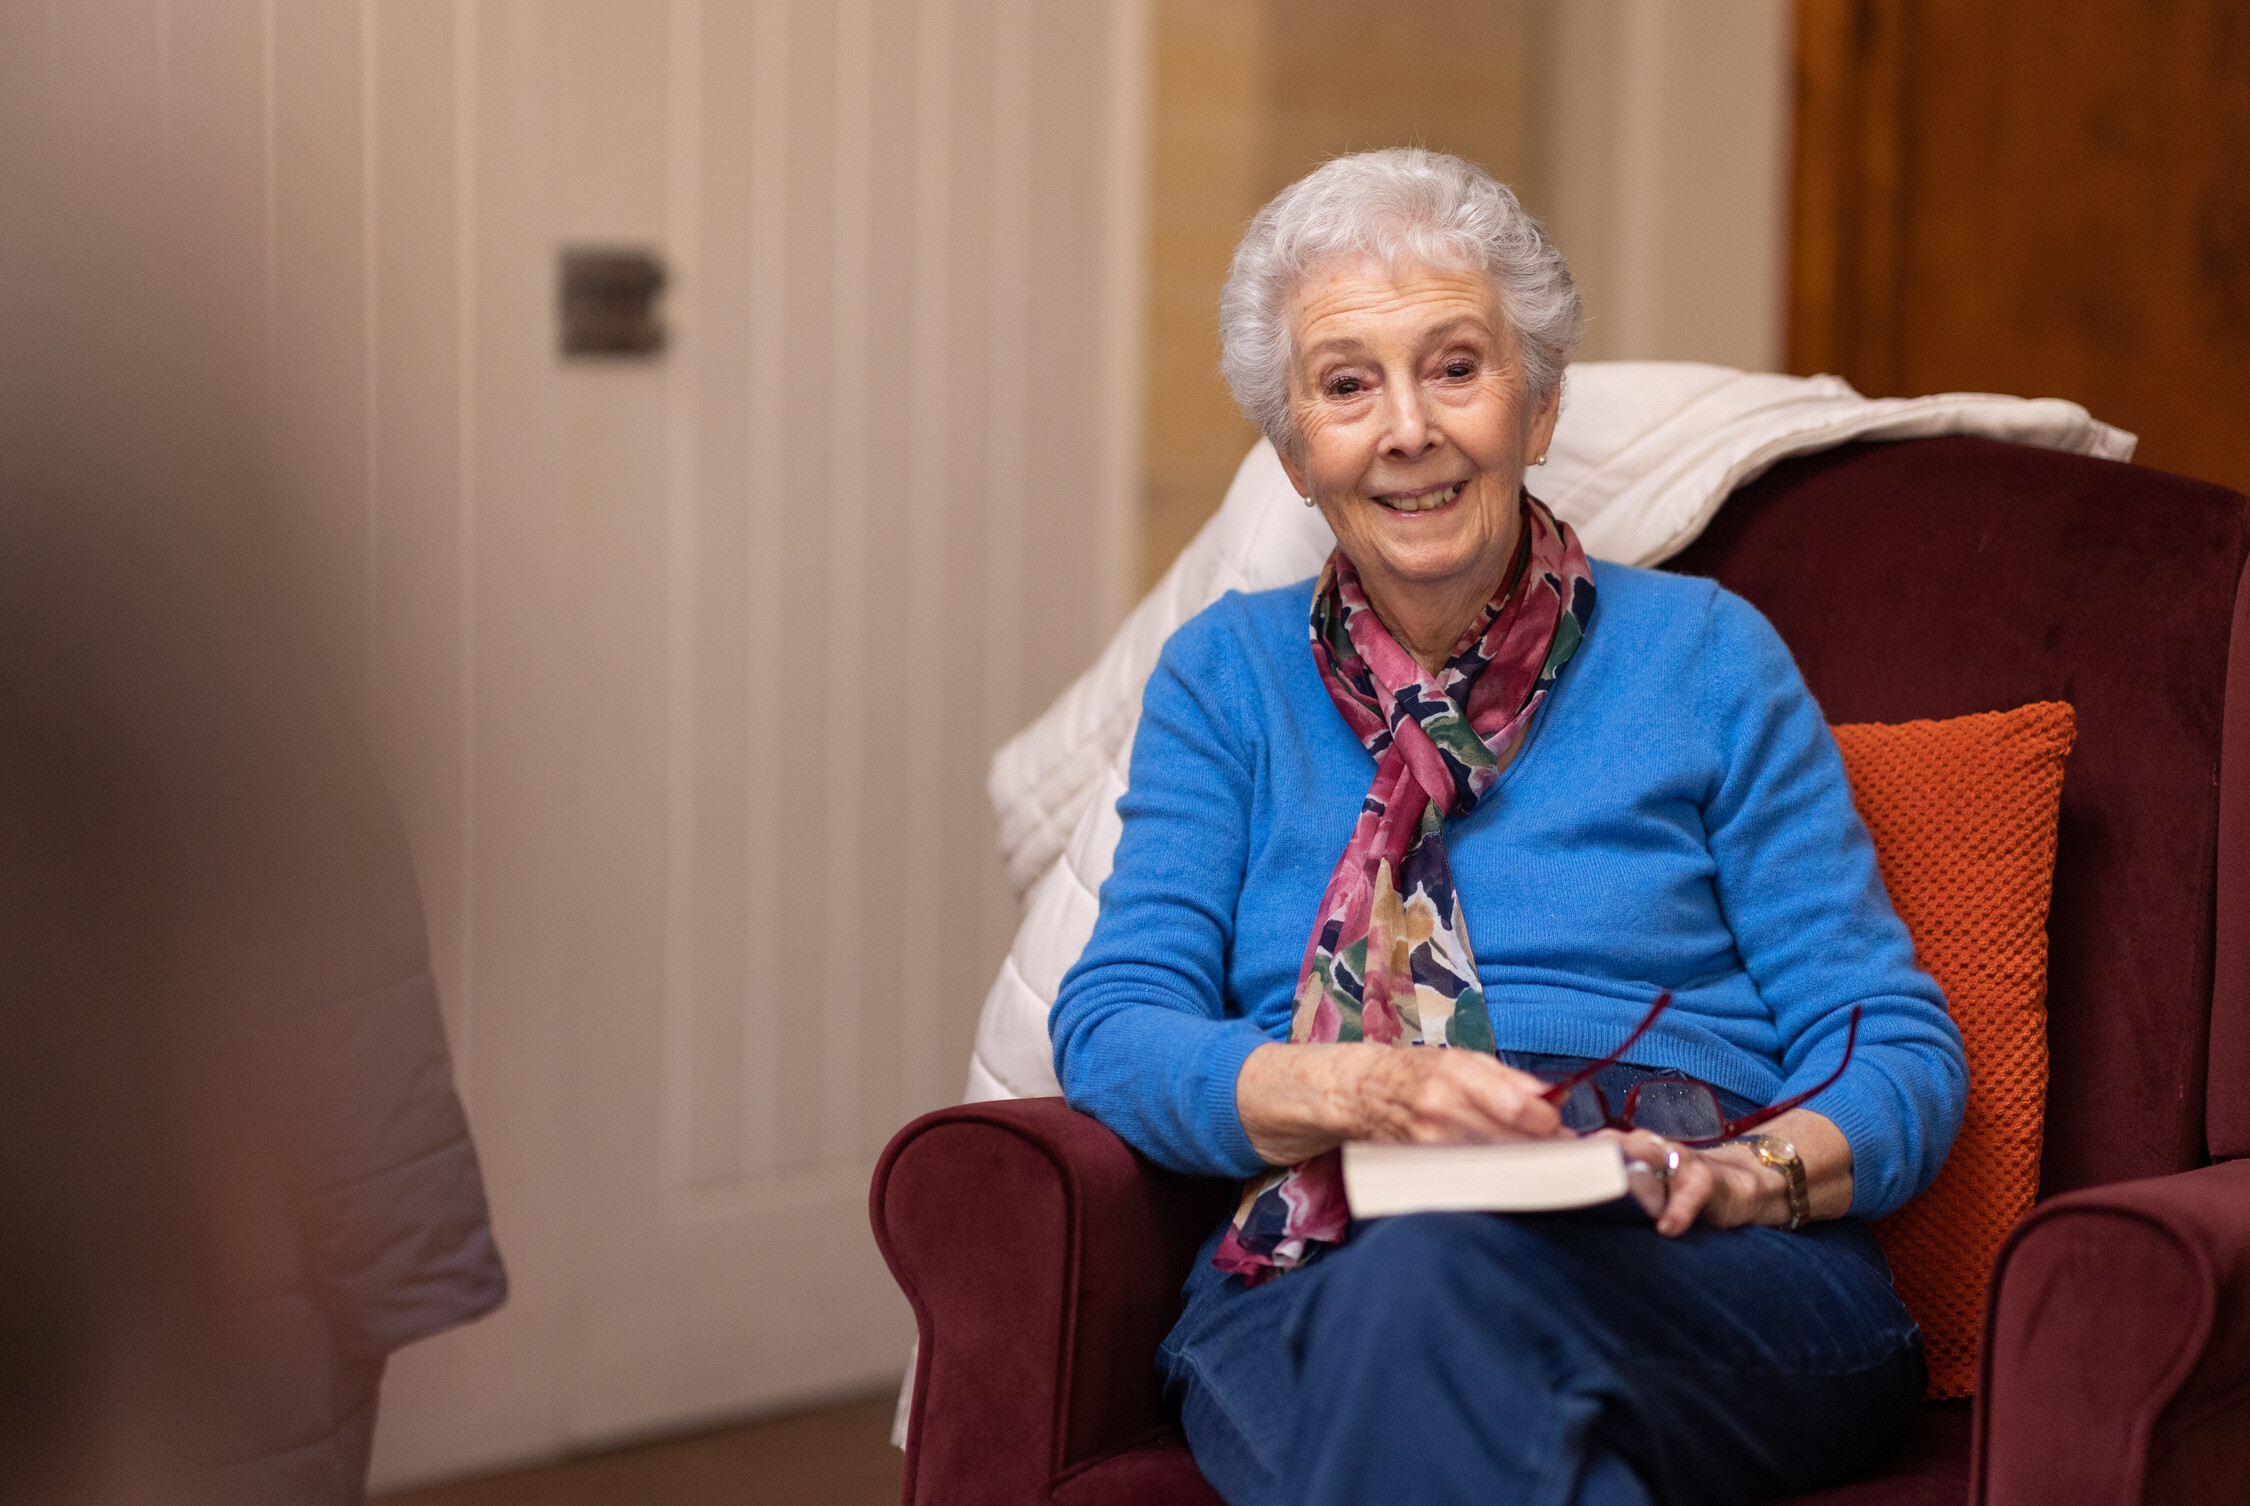 Photo of older woman sitting in chair holding a book and smiling